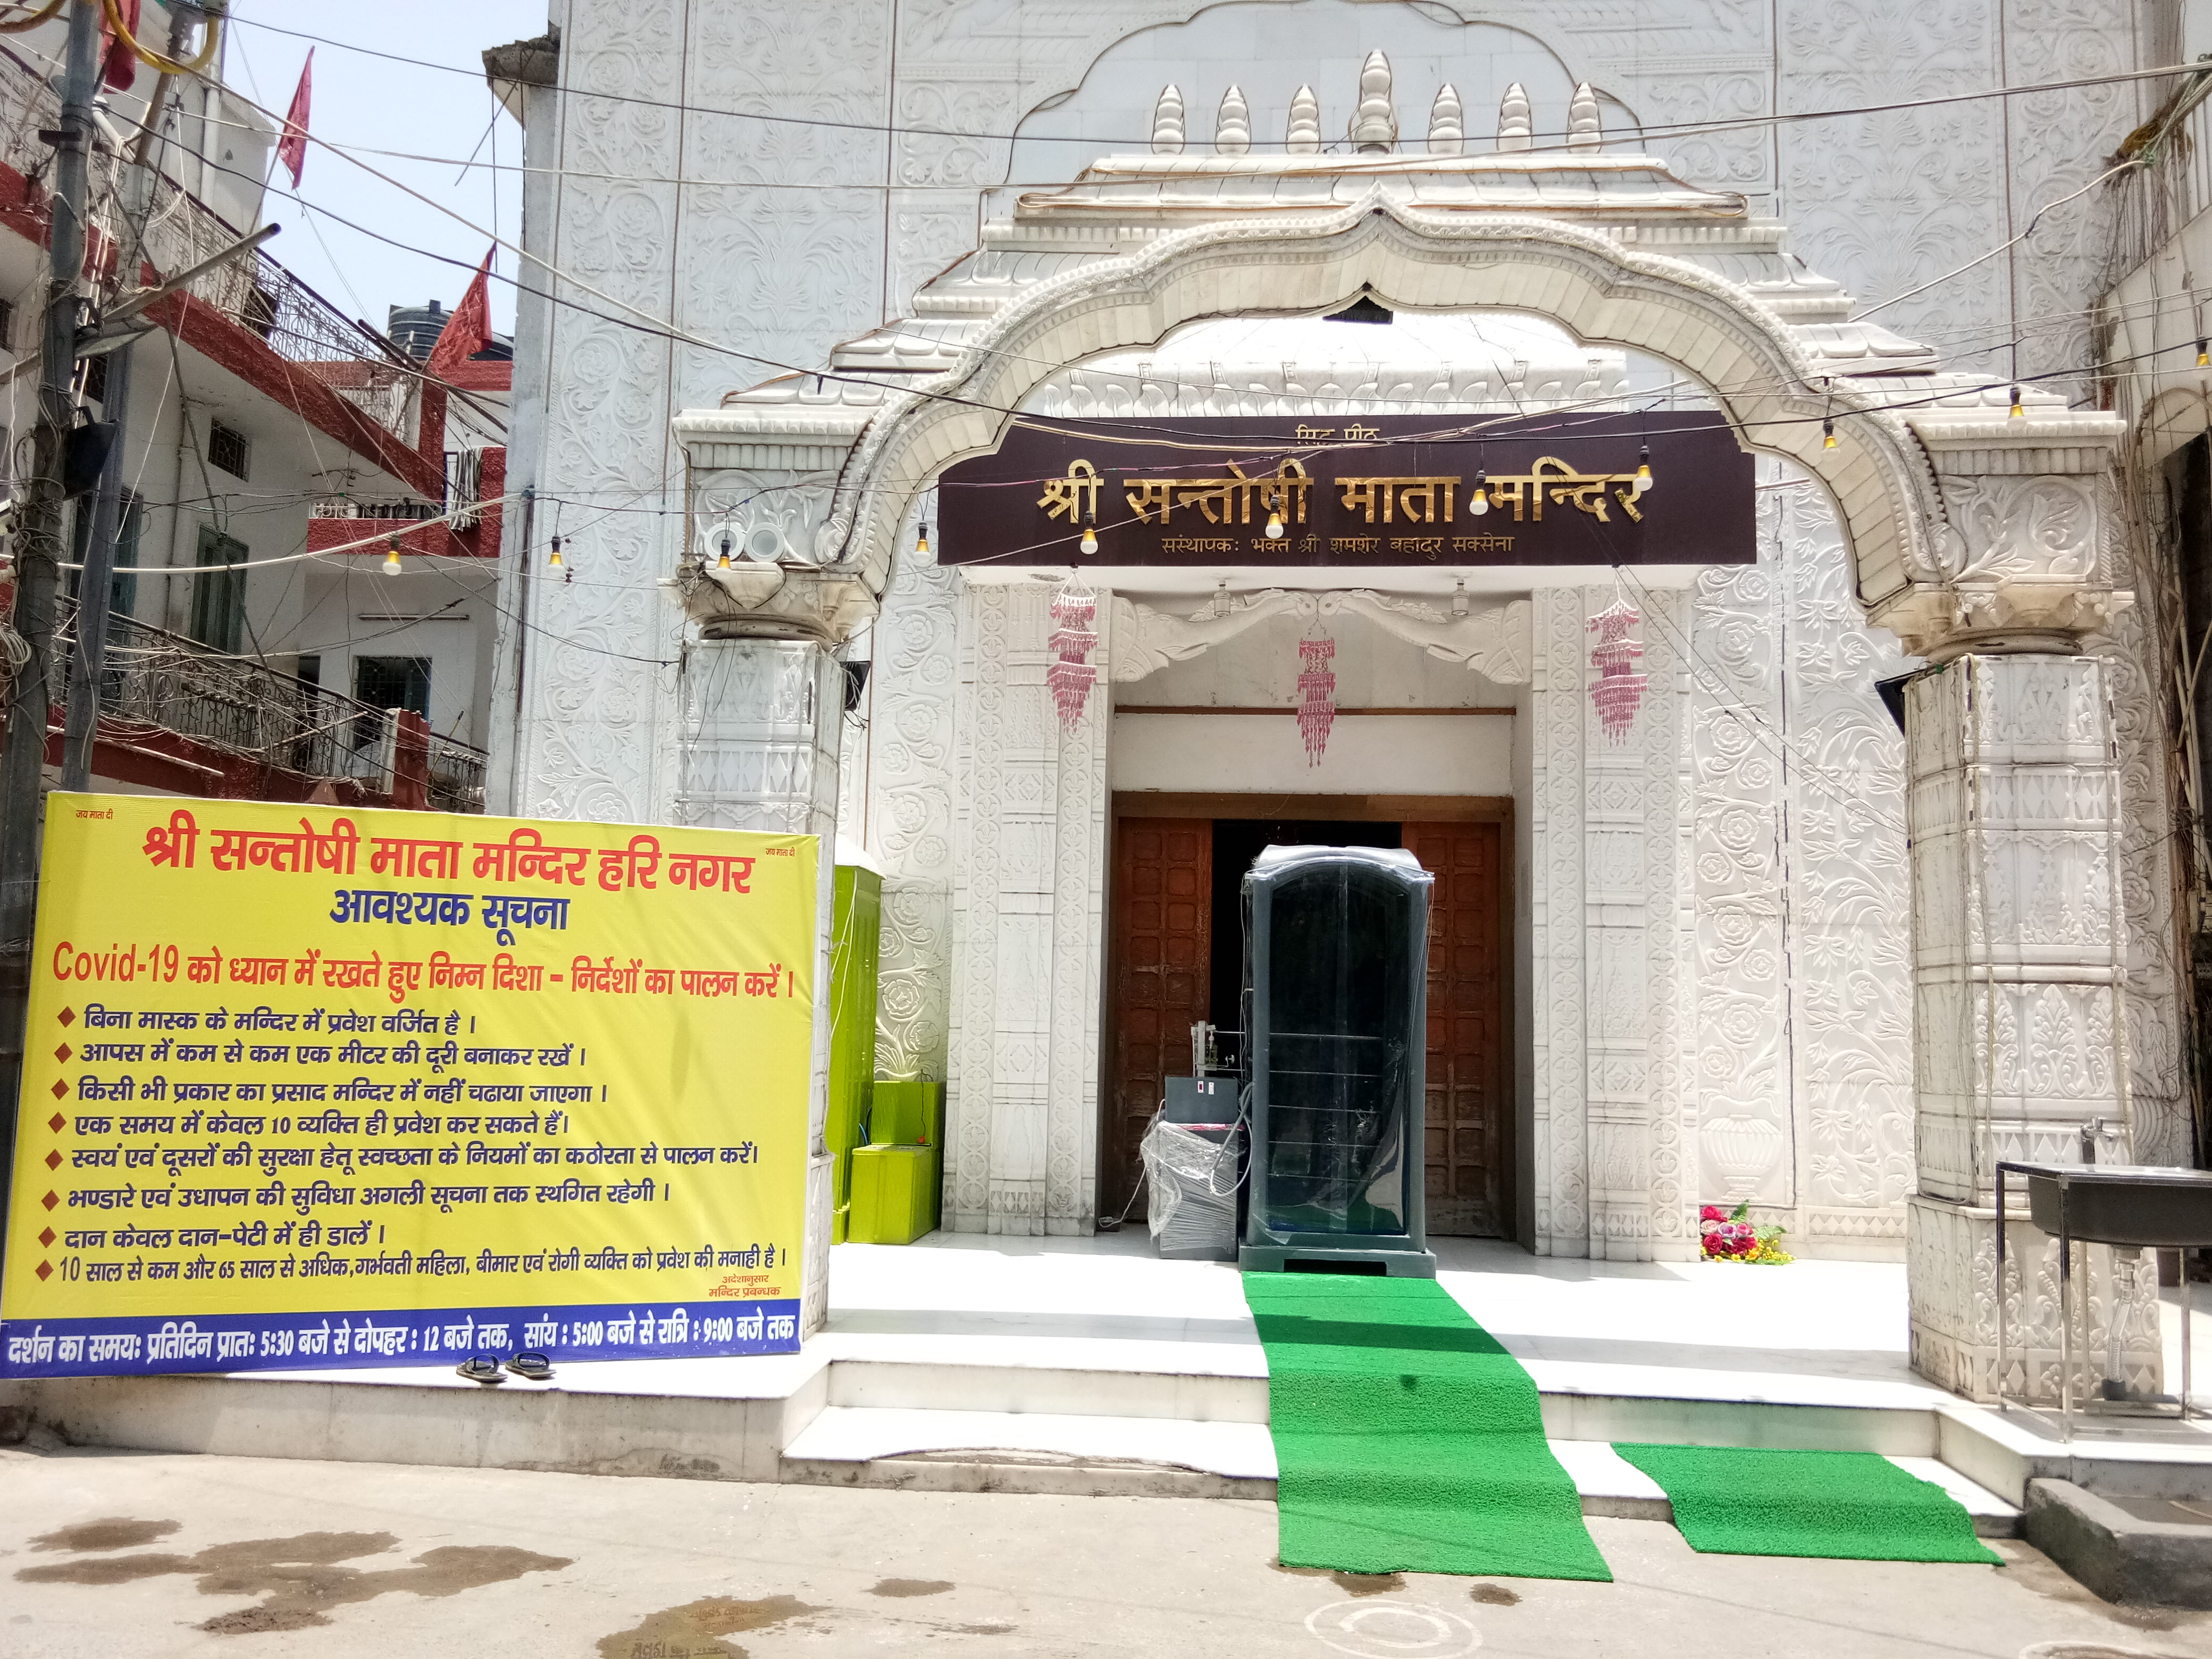 guidelines at temple entry gate